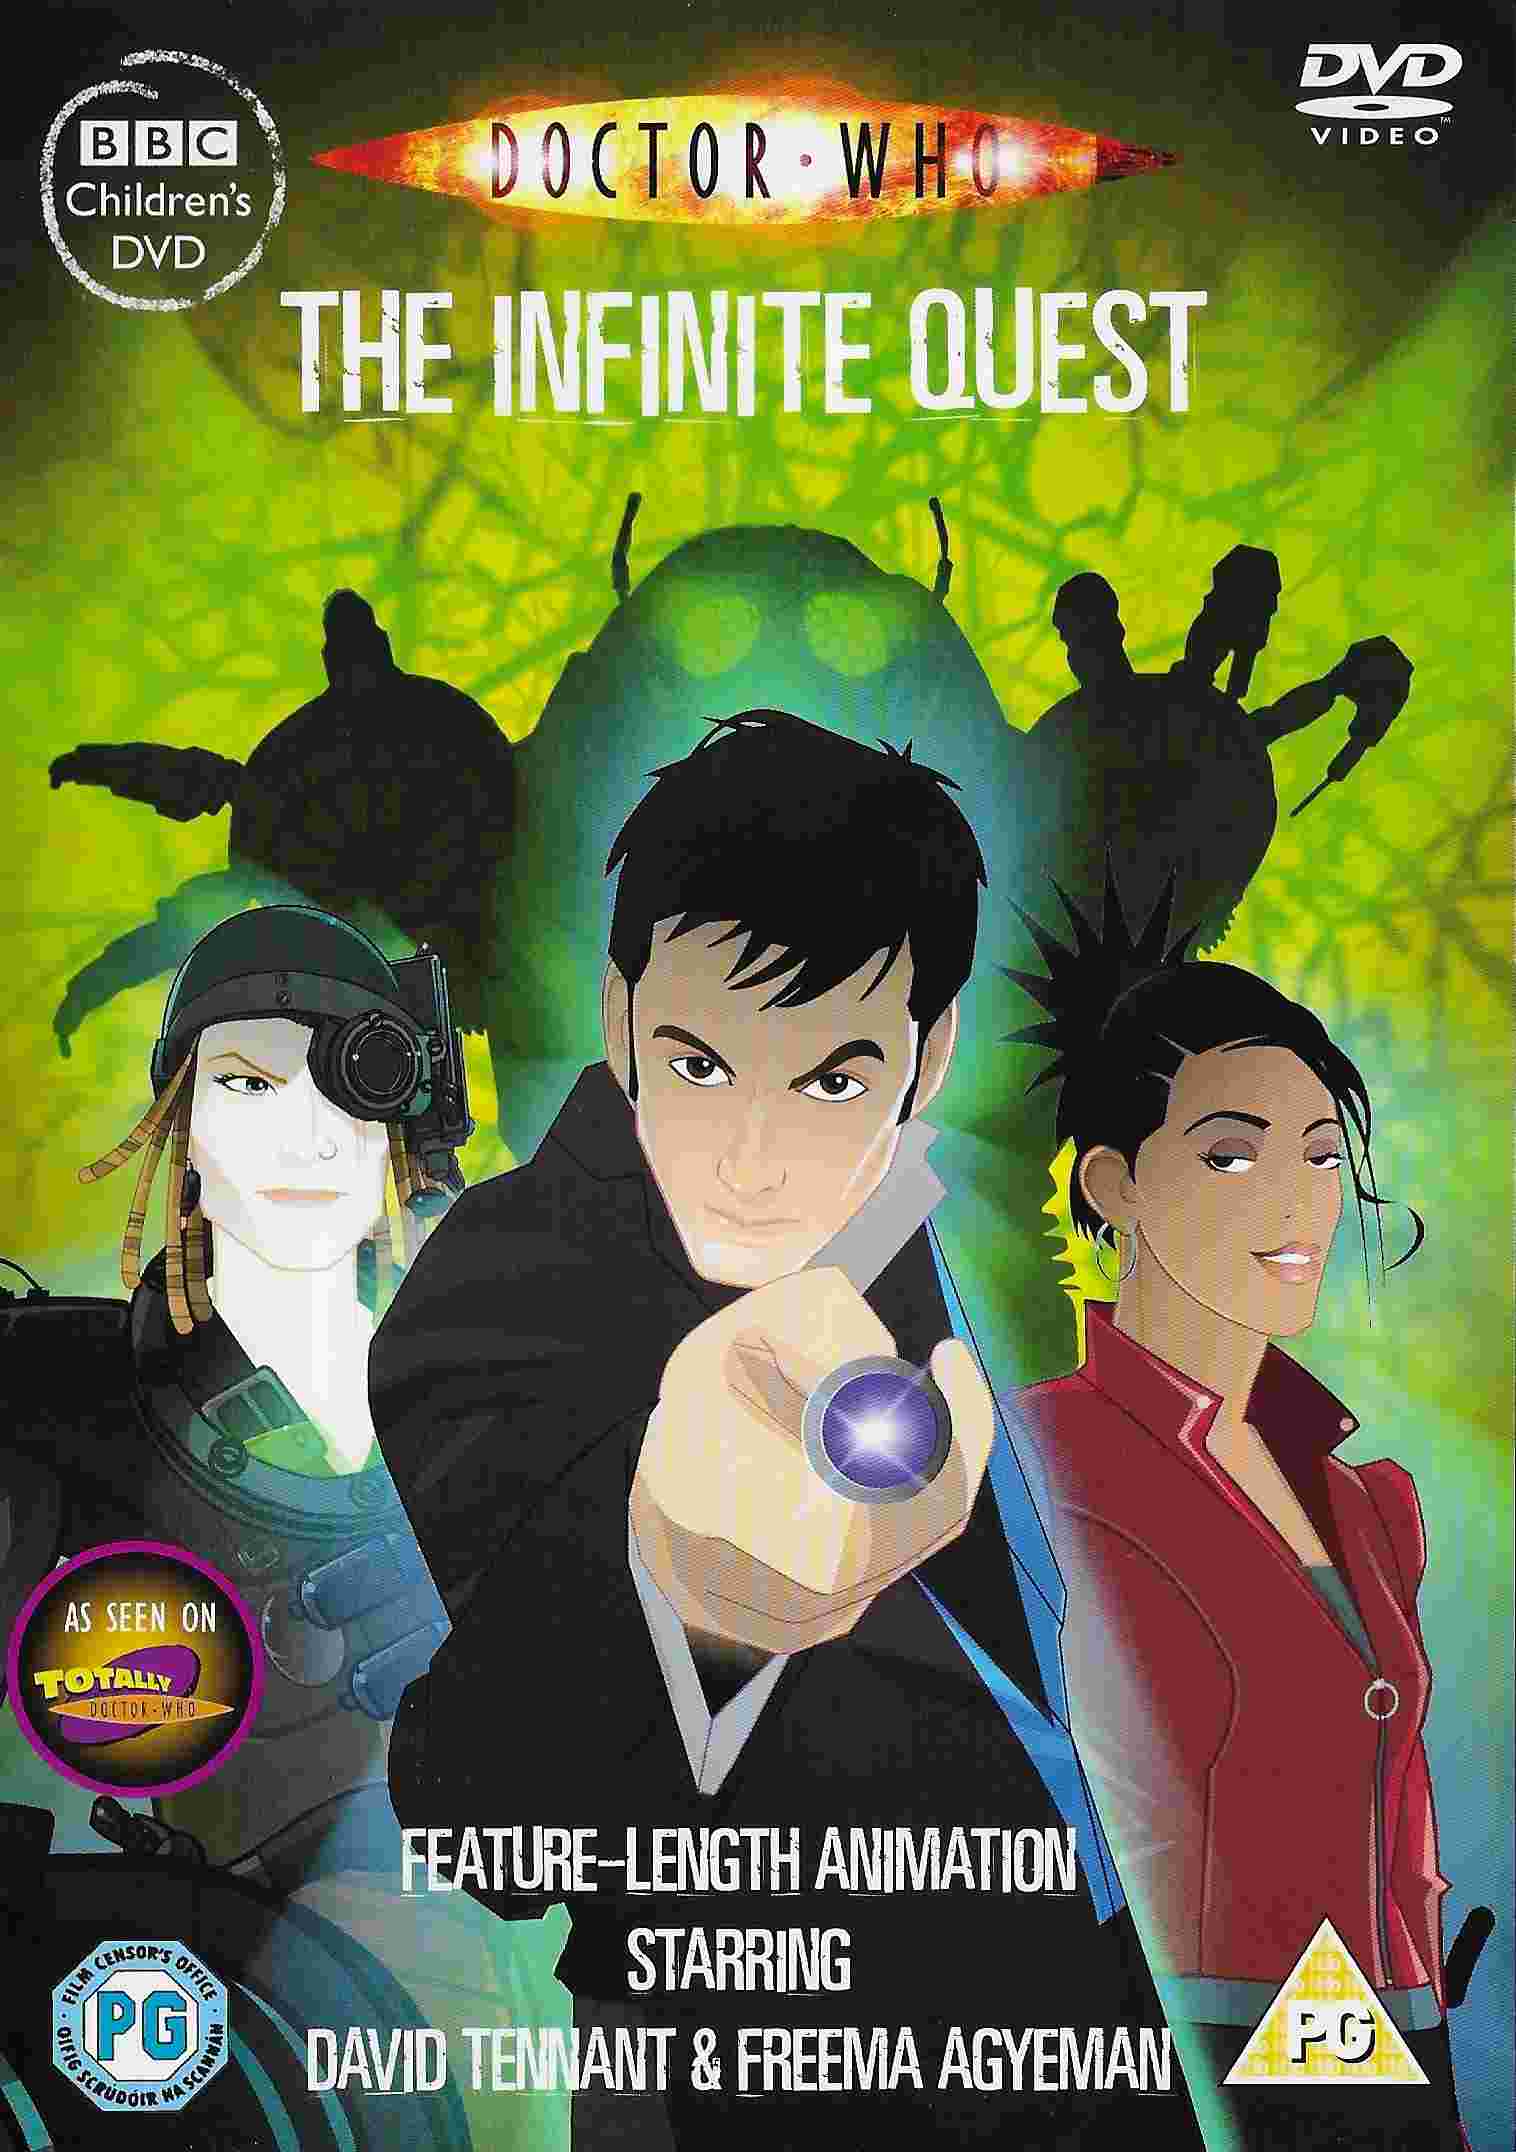 Picture of BBCDVD 2452 Doctor Who - The infinite quest (Amination) - Includes 4 art cards by artist Alan Barnes from the BBC dvds - Records and Tapes library